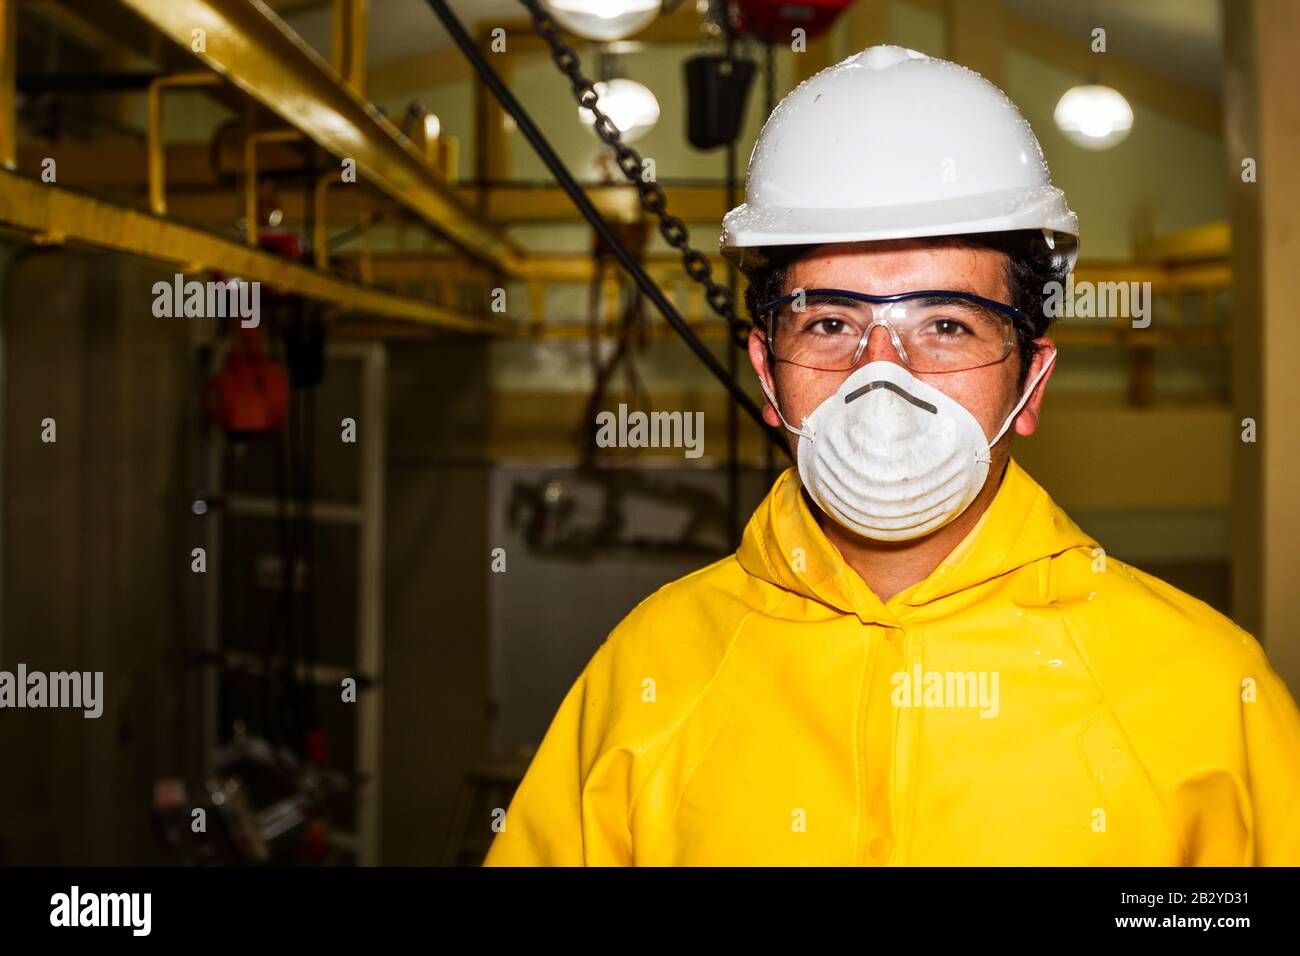 Slaughterhouse Butcher Wearing Specific Protection Equipment Against Production Line Background Stock Photo